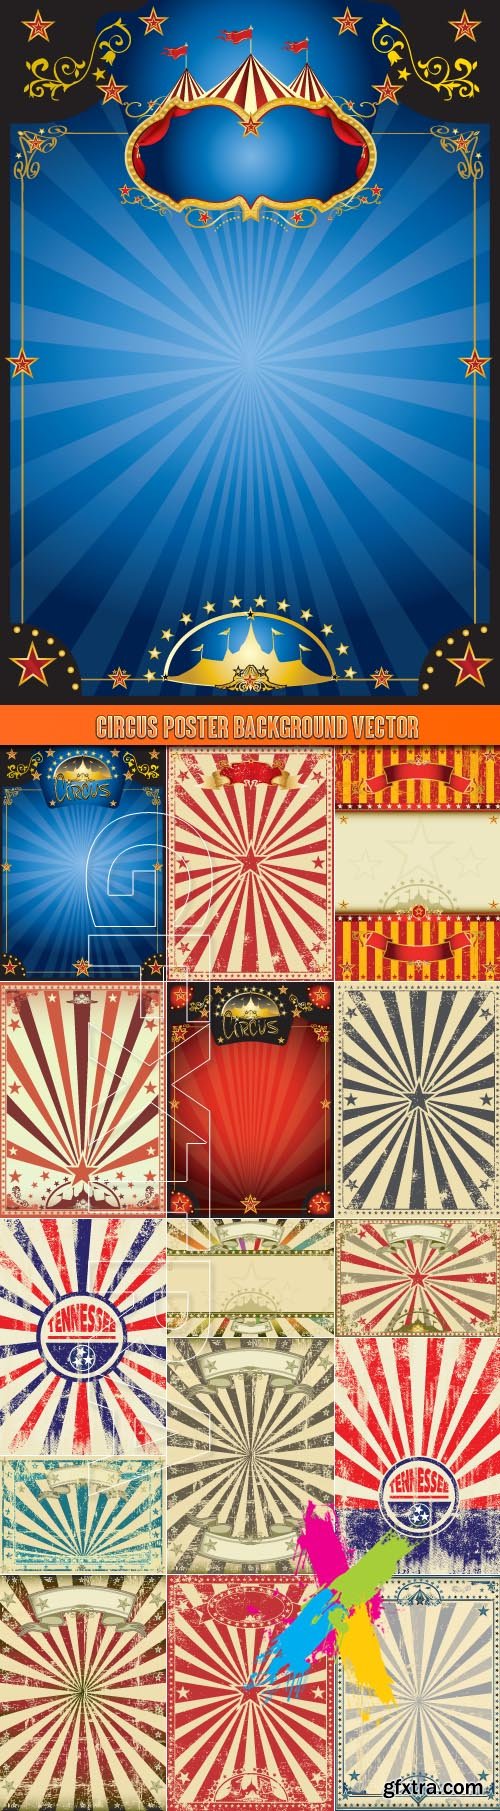 Circus poster Background vector